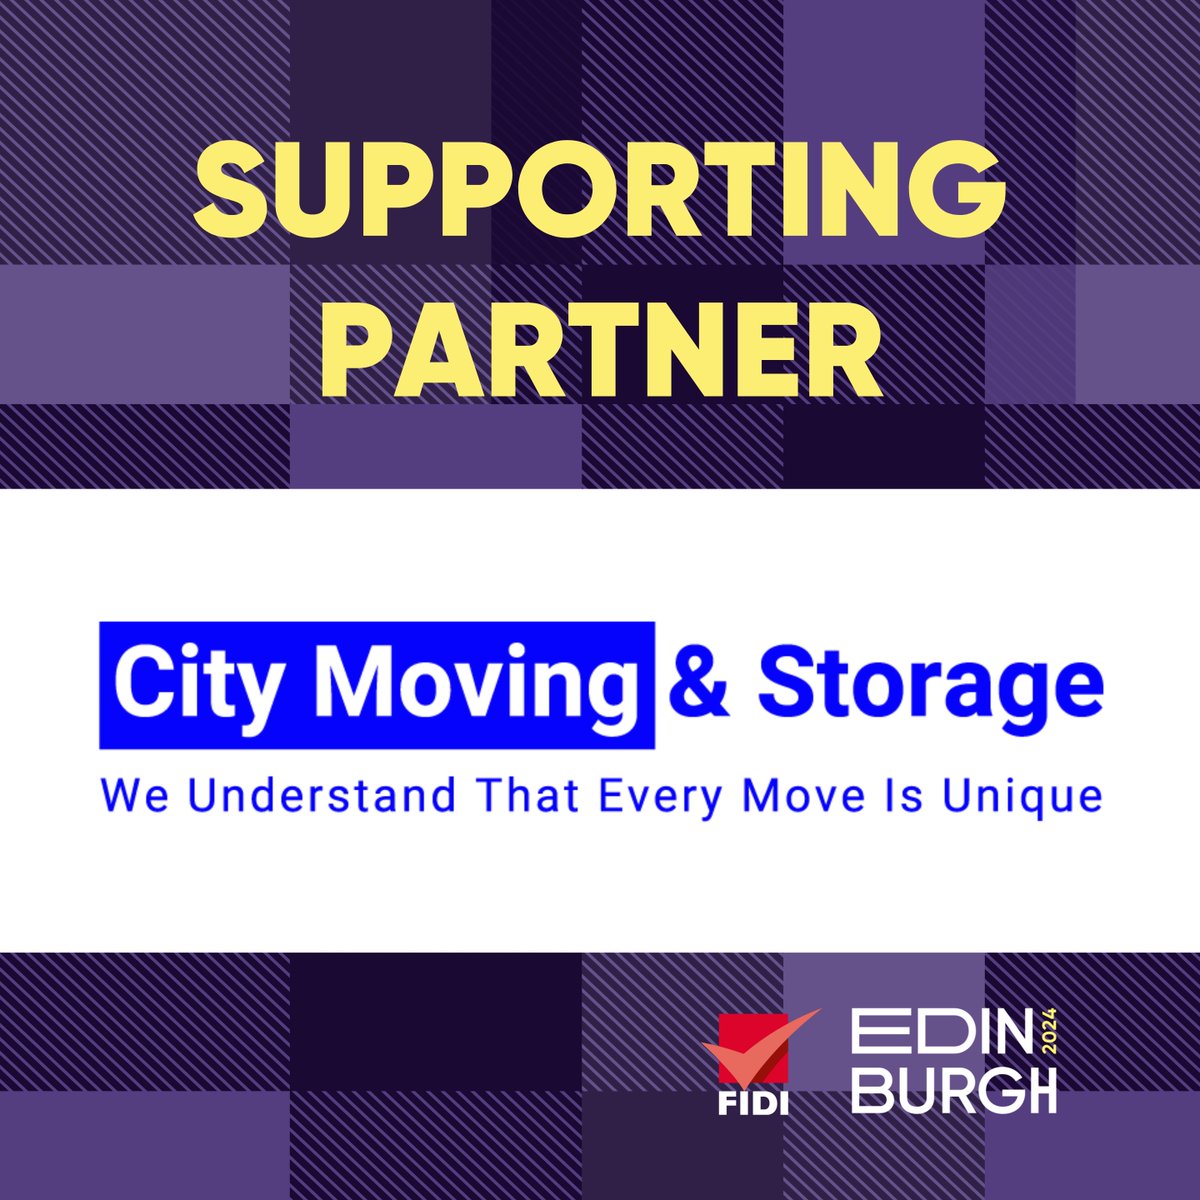 🌍 #2024FIDIconference: Thank you, City Moving & Storage, partner of the 2024 FIDI Conference in Edinburgh! 📱Get the app to connect with attendees, book meetings & view your agenda : 🔶Google Play Store ➡ lnkd.in/e86wv6Jv 🔶Apple App Store ➡ lnkd.in/e7XJ6xun